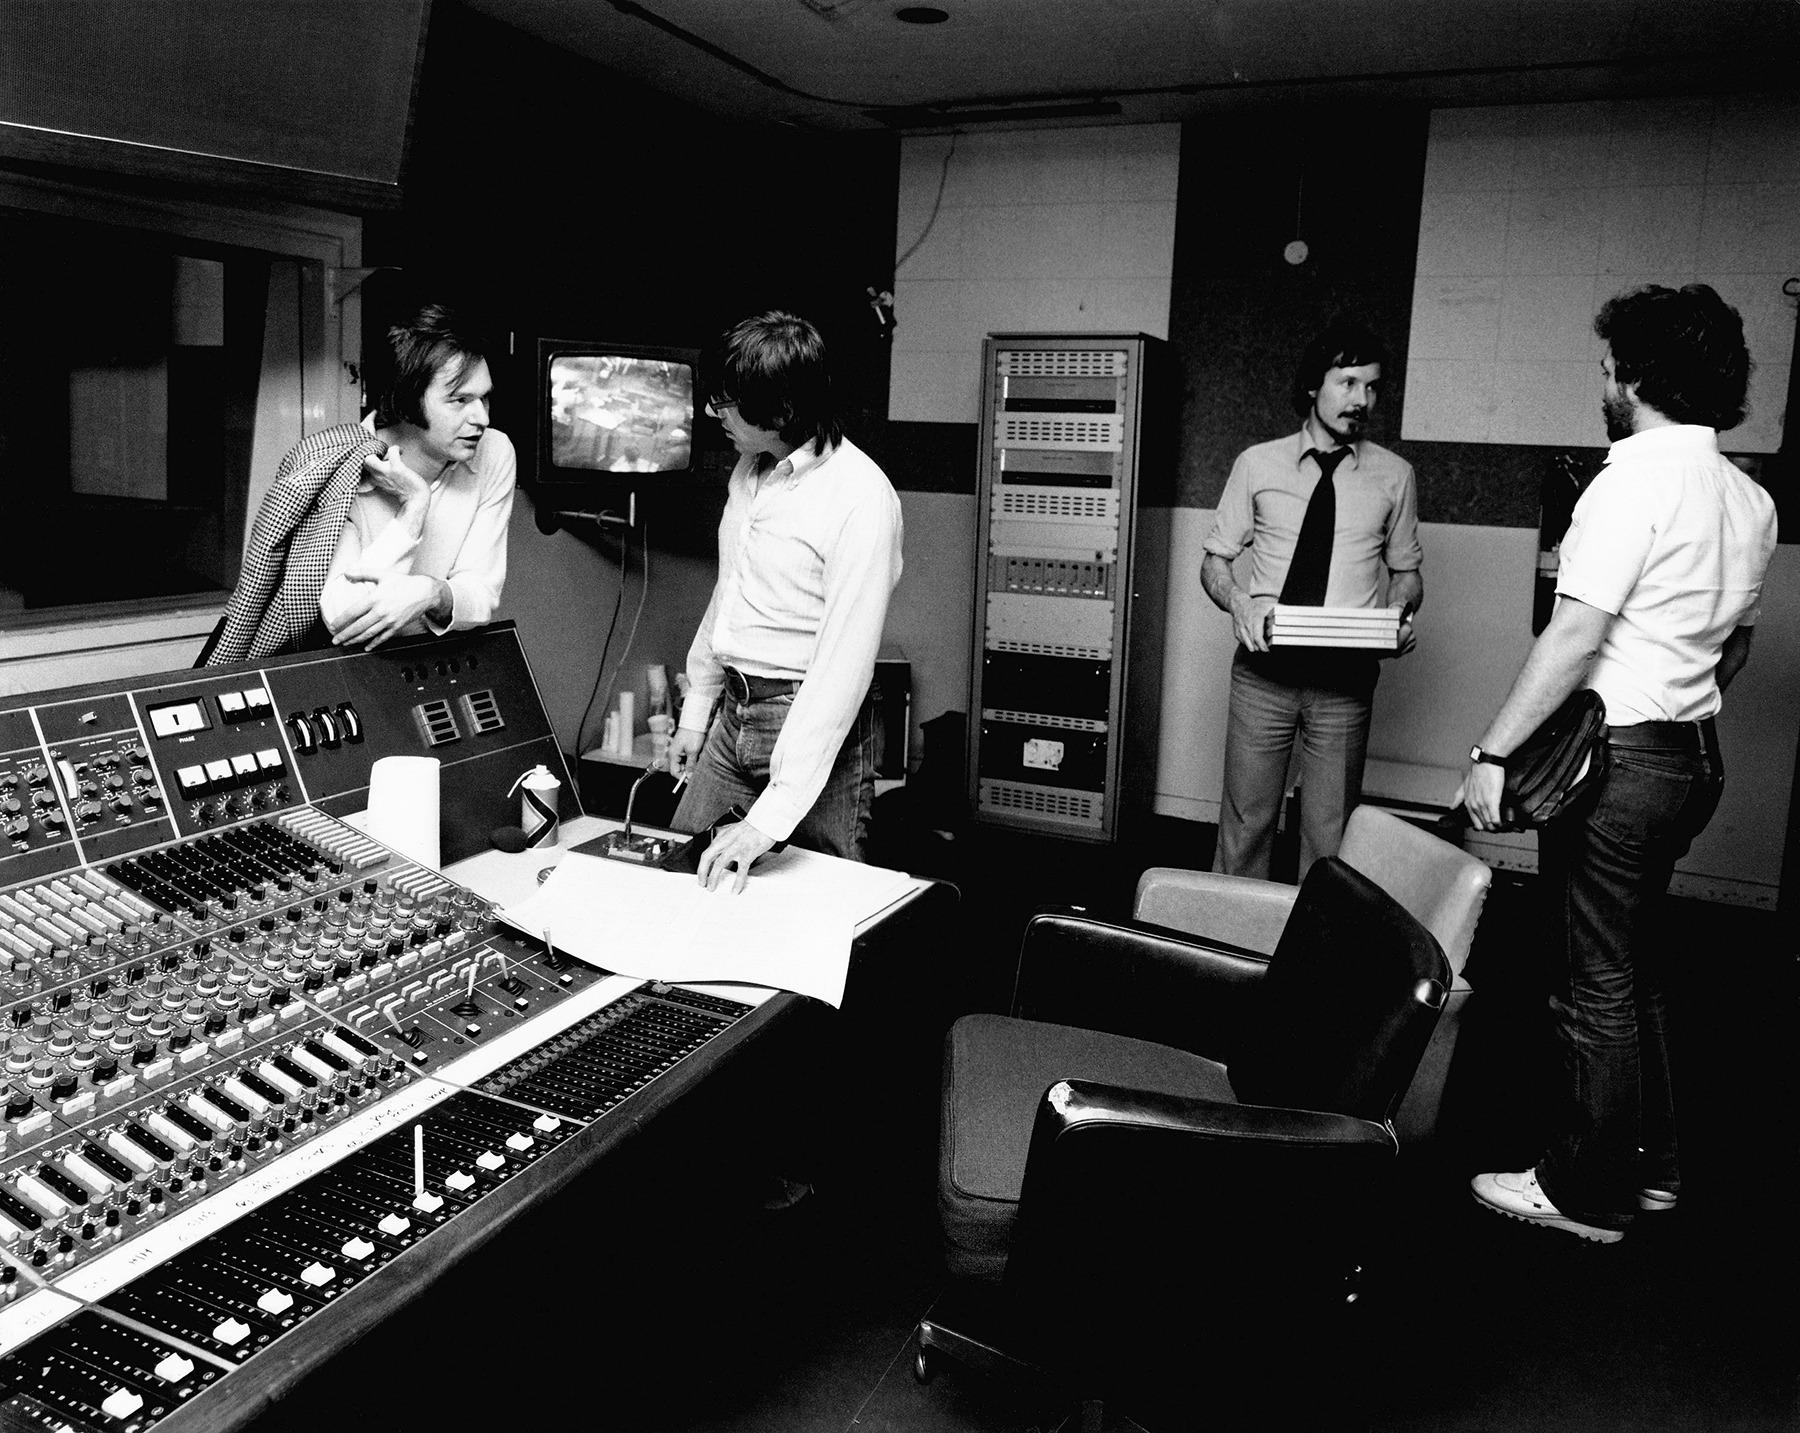 KPM employees including composer Keith Mansfield (second from left) in the control room.